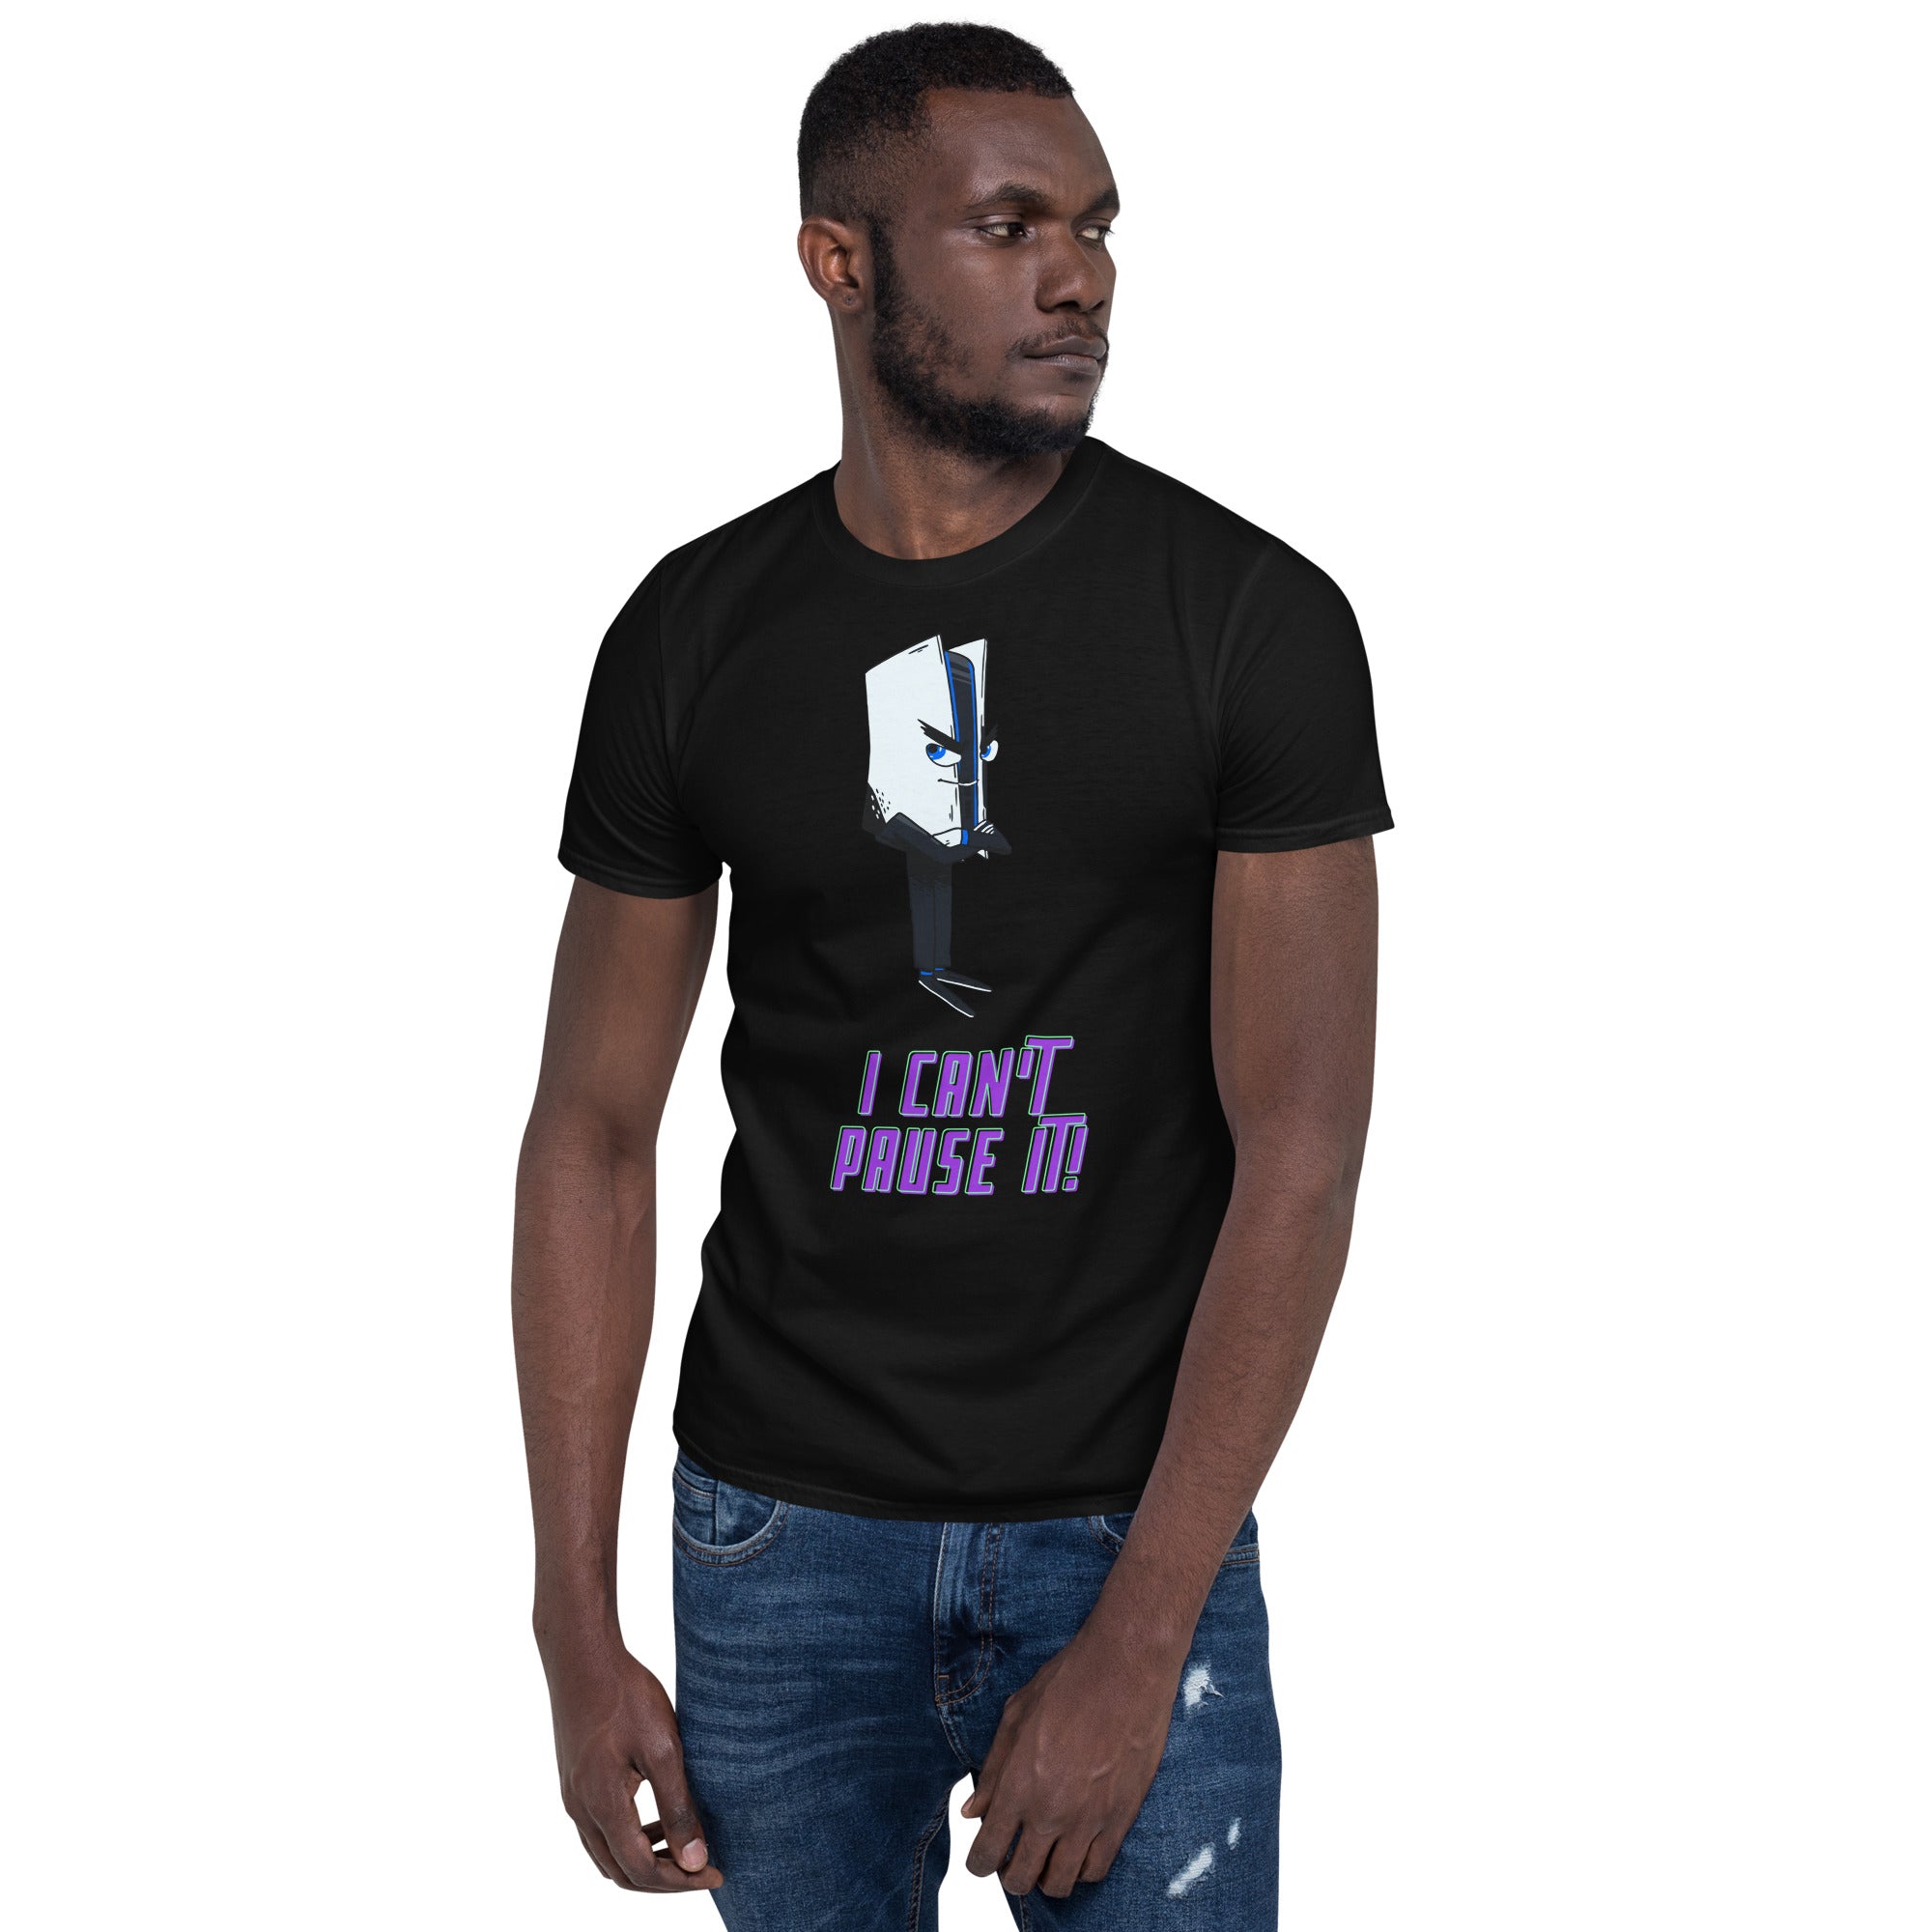 Short-Sleeve Unisex I CAN'T PAUSE IT! -